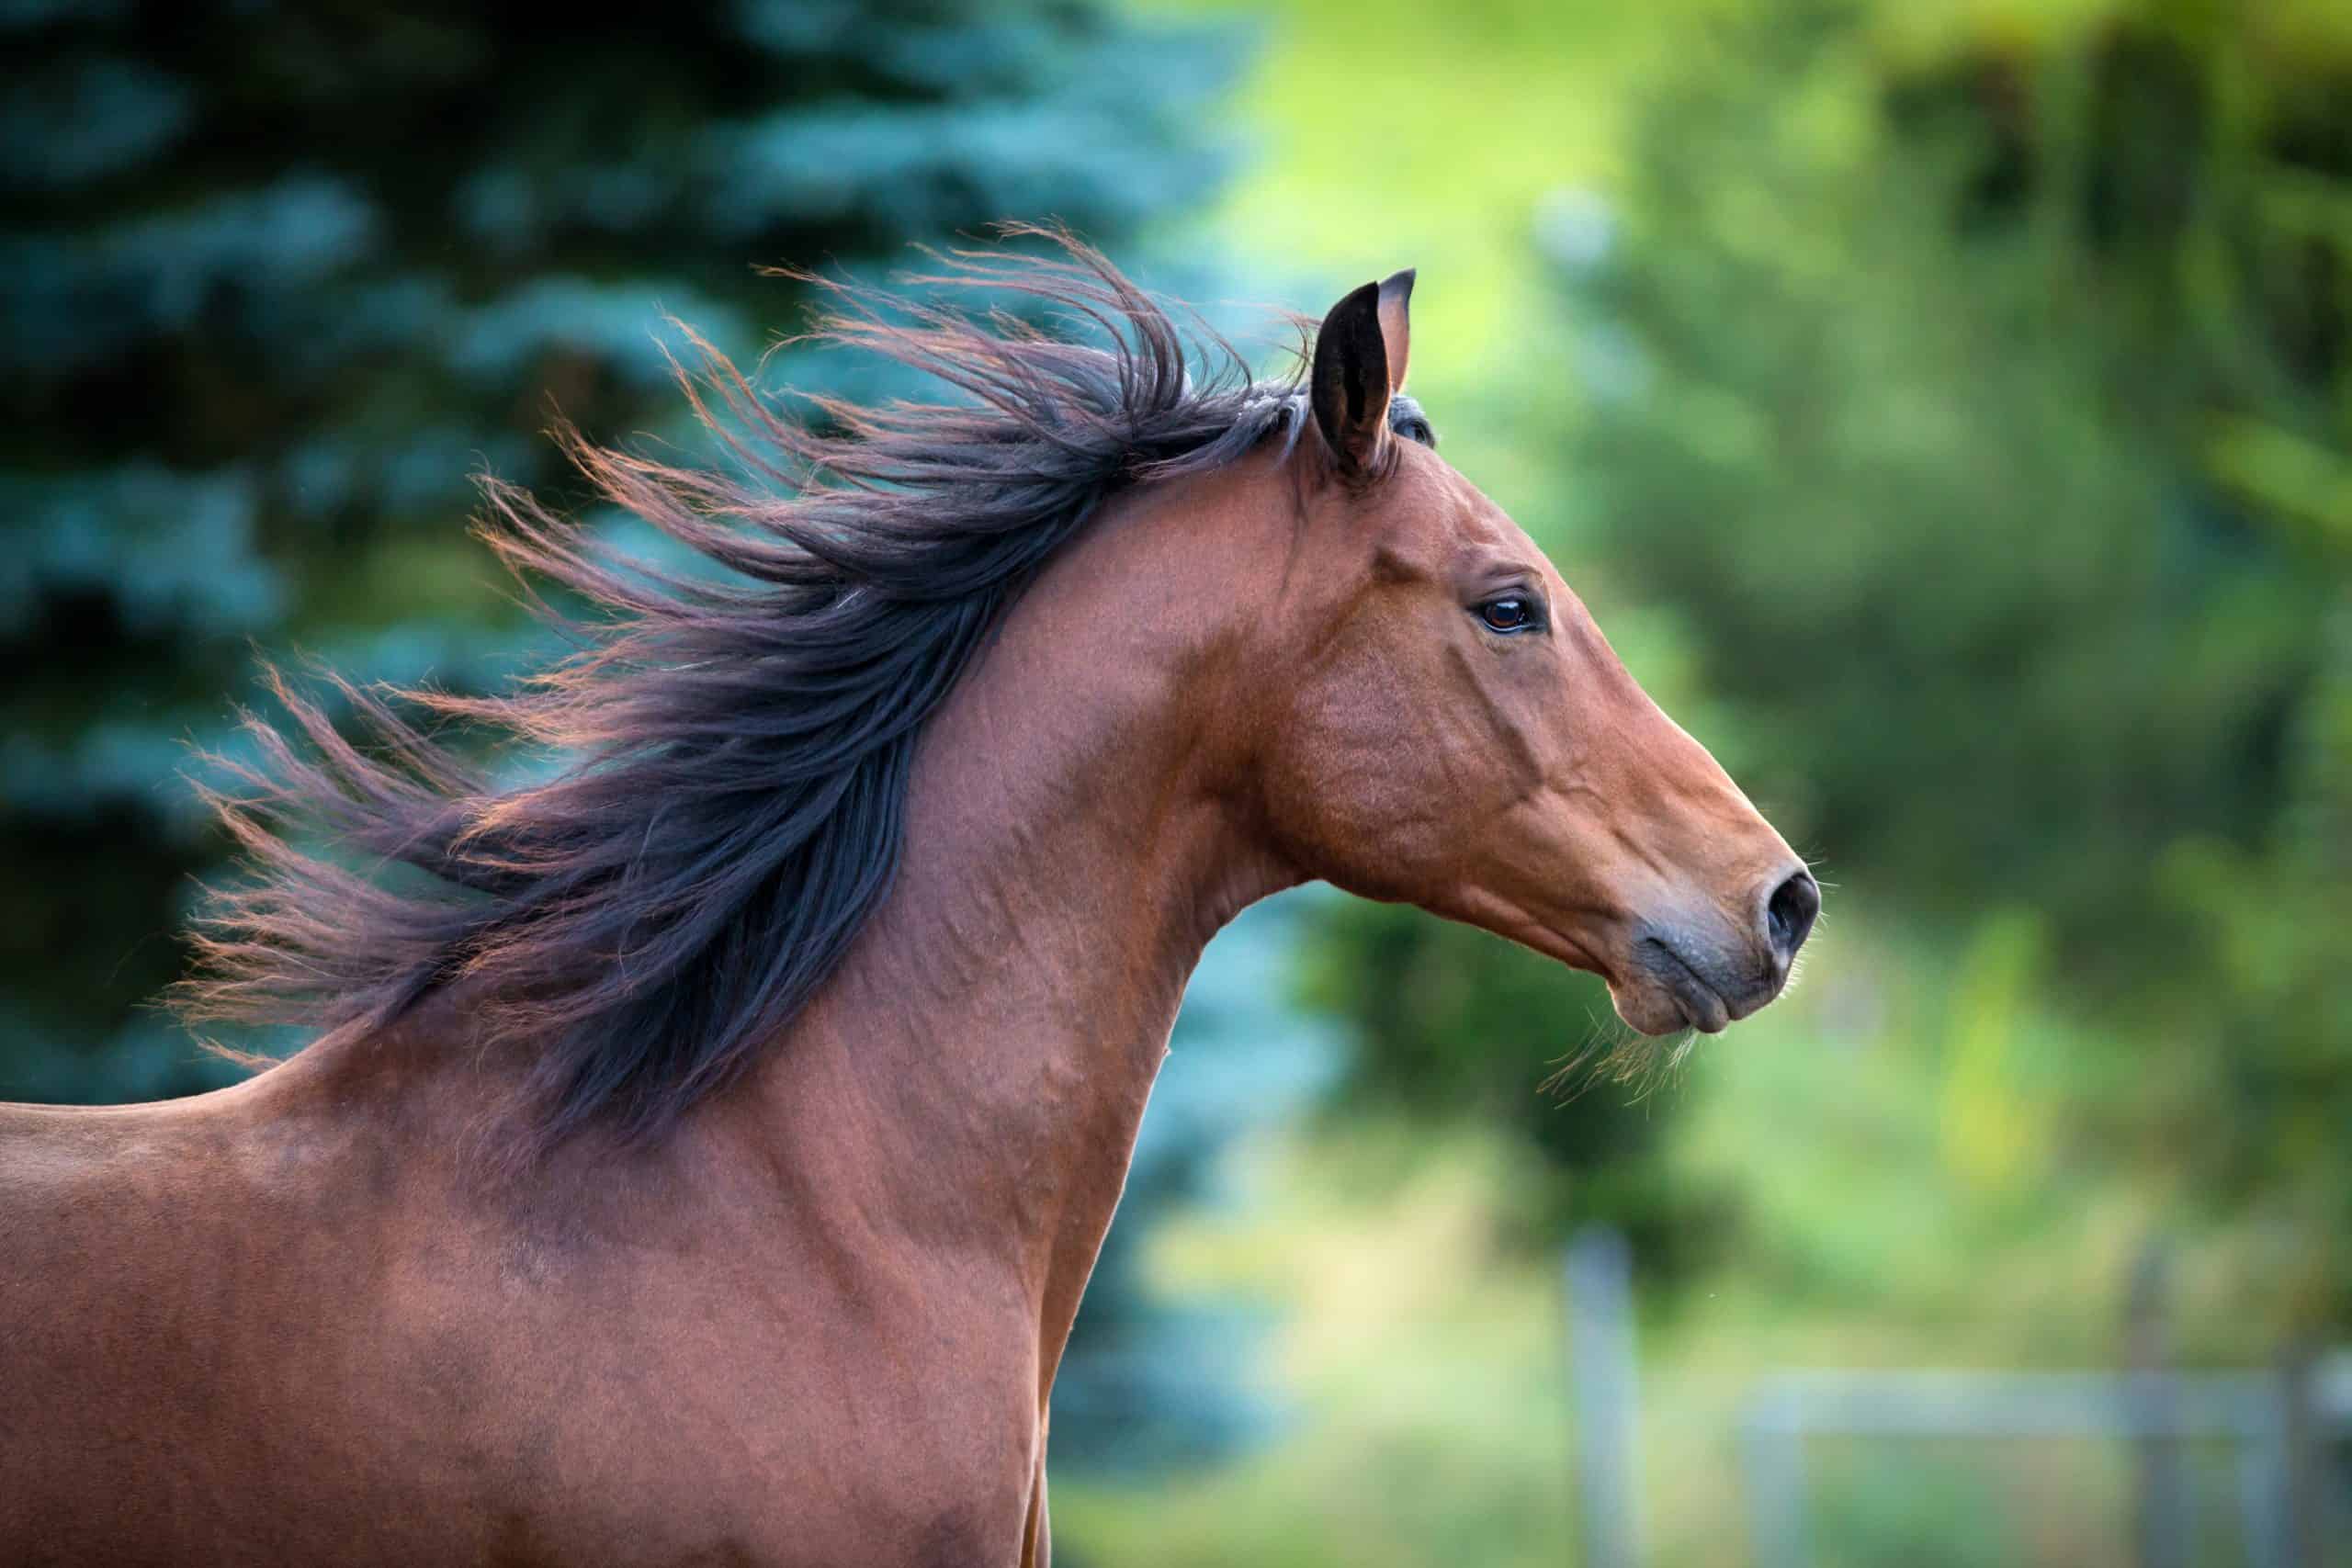 Bay horse portrait on green background. Trakehner horse with long mane running outdoor.